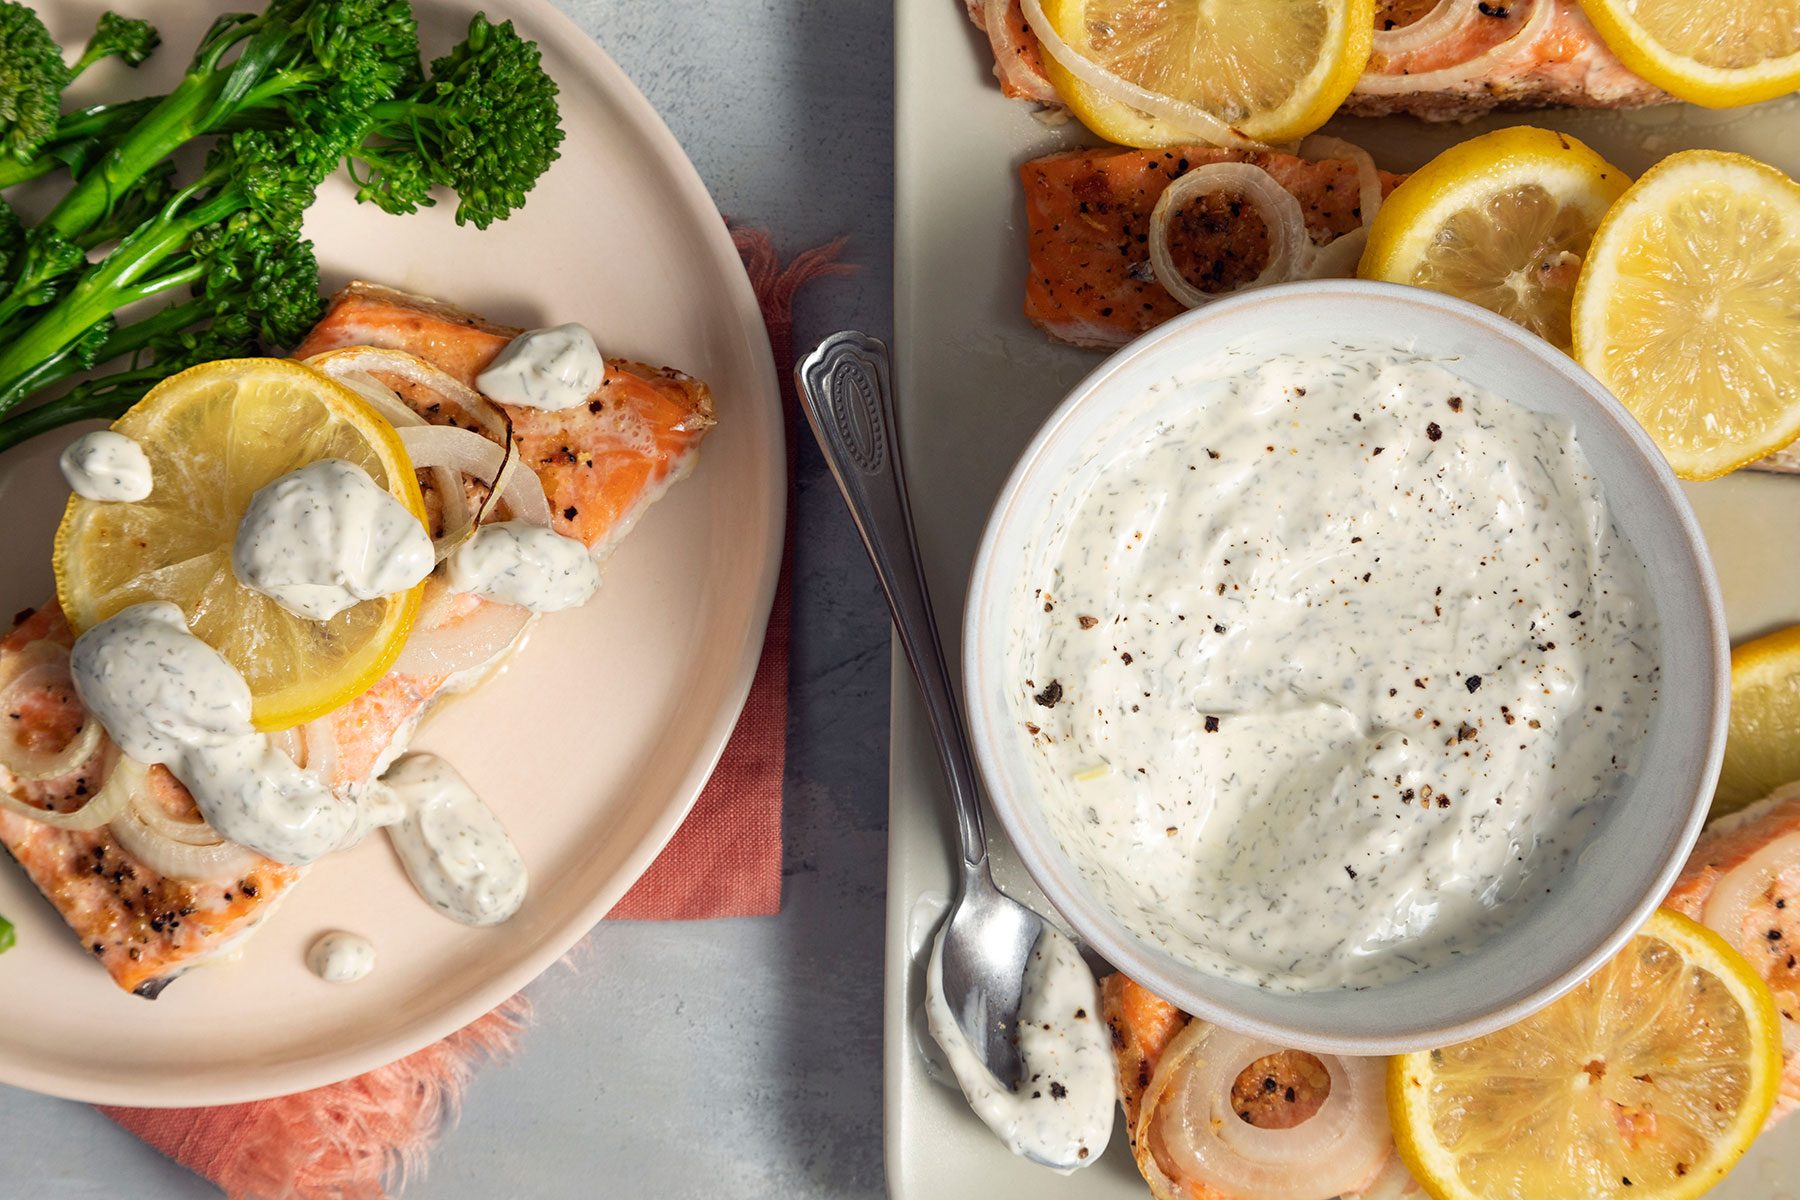 A plate of food with a bowl of Dill Sauce for Salmon and lemon slices